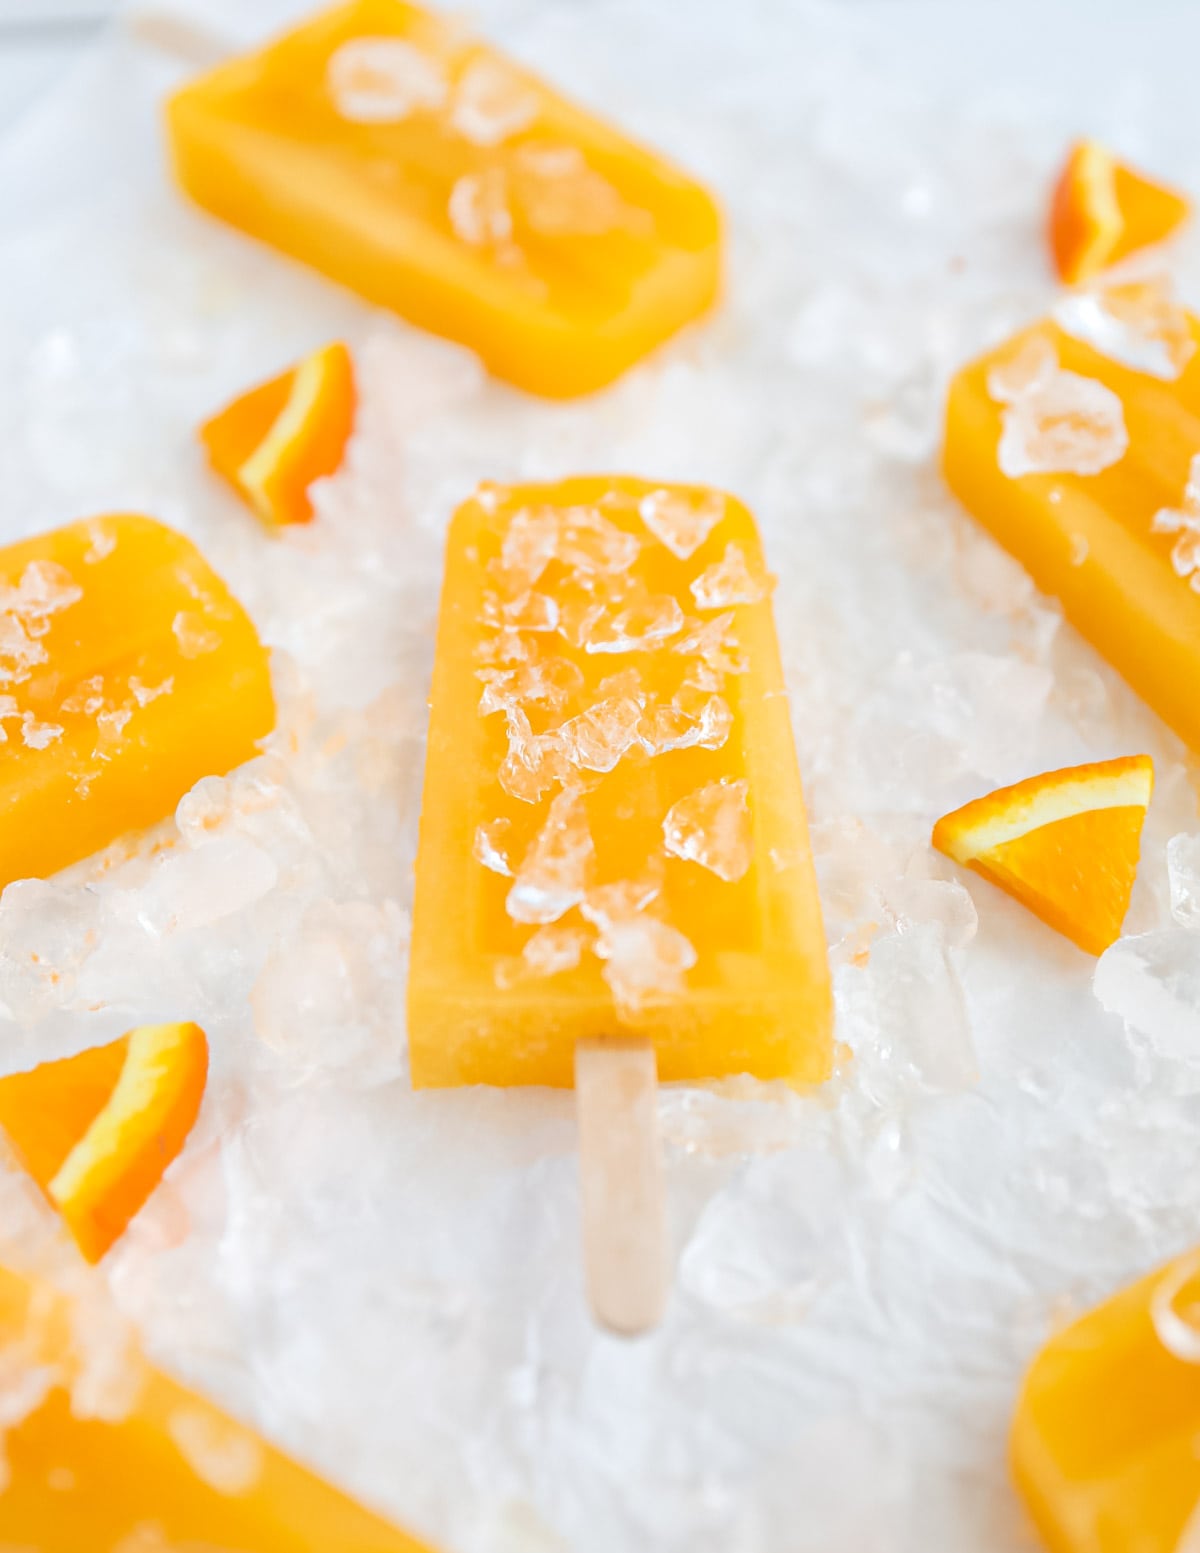 A side angle picture of several orange ice pops, resting on a bed of crushed ice.